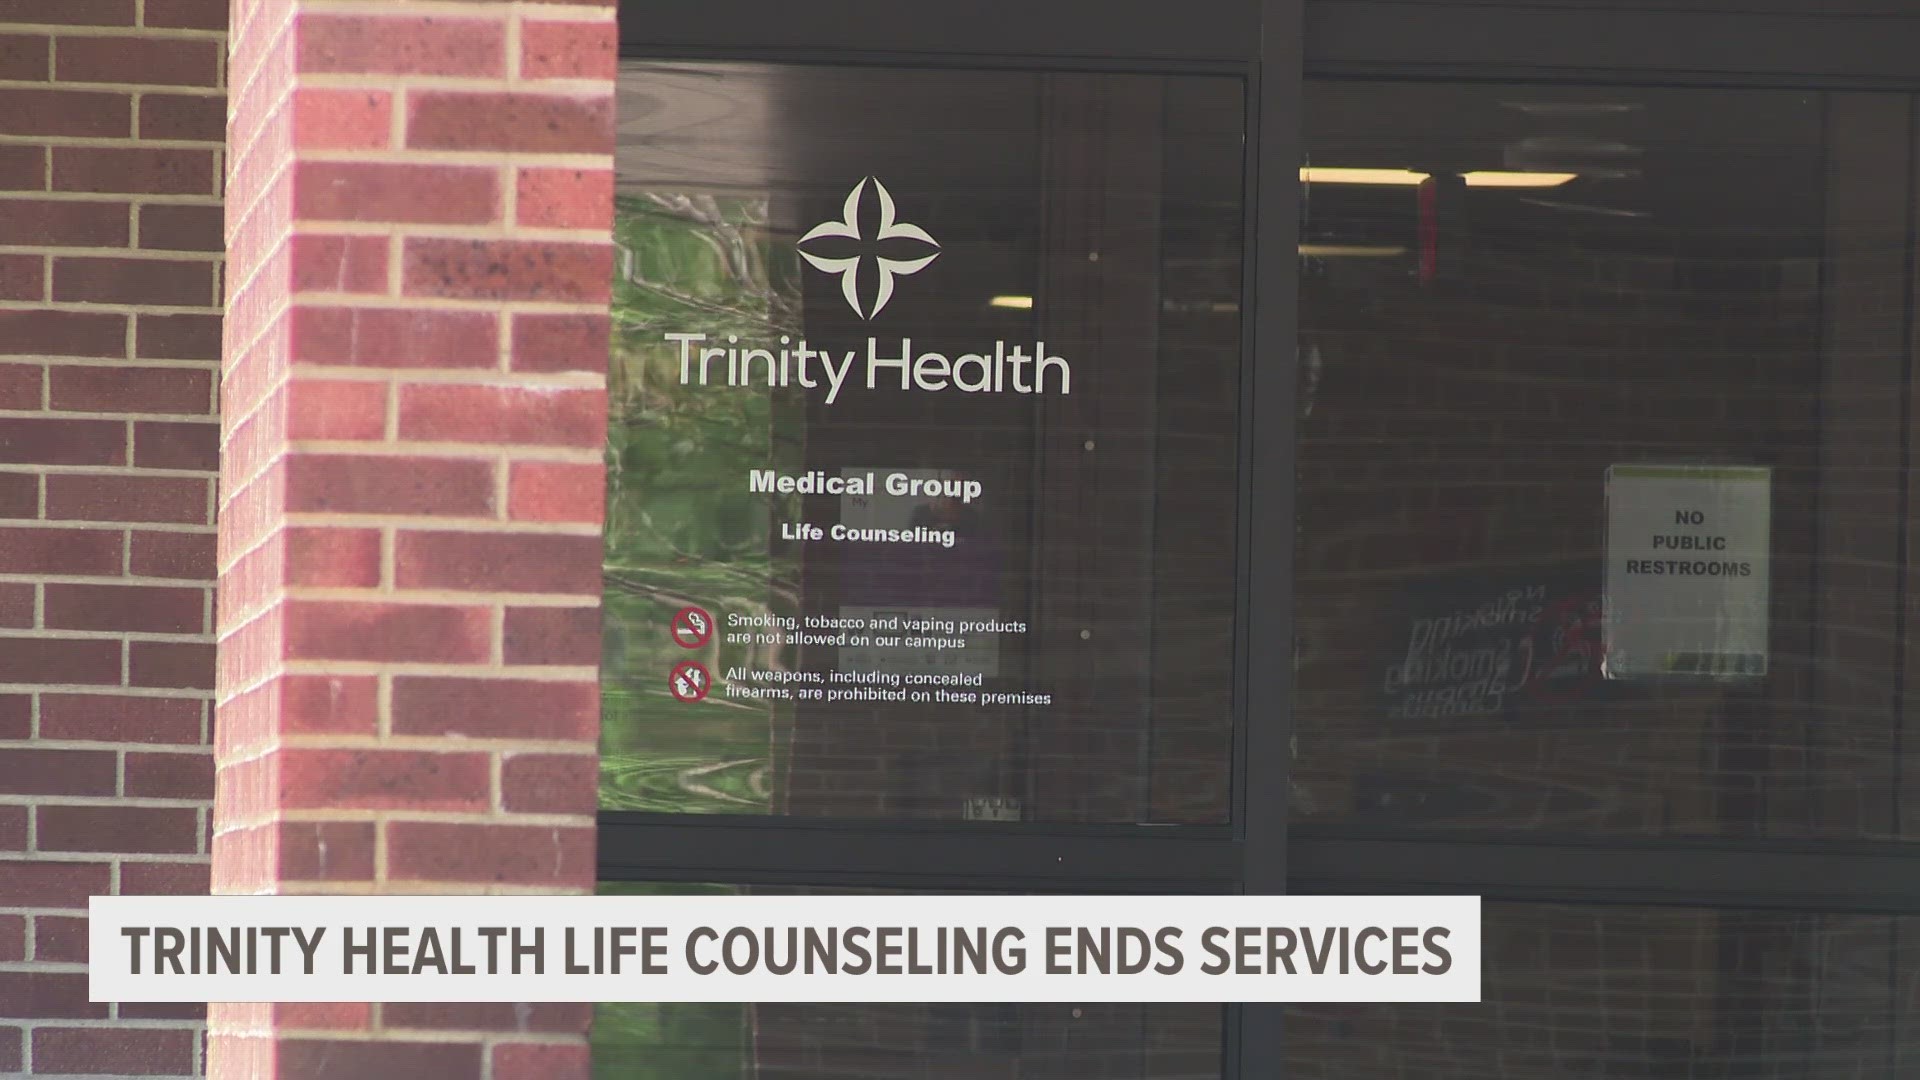 Trinity Health Life Counseling will close later this year. Patients will be referred to Hackley Community Care or other nearby providers.